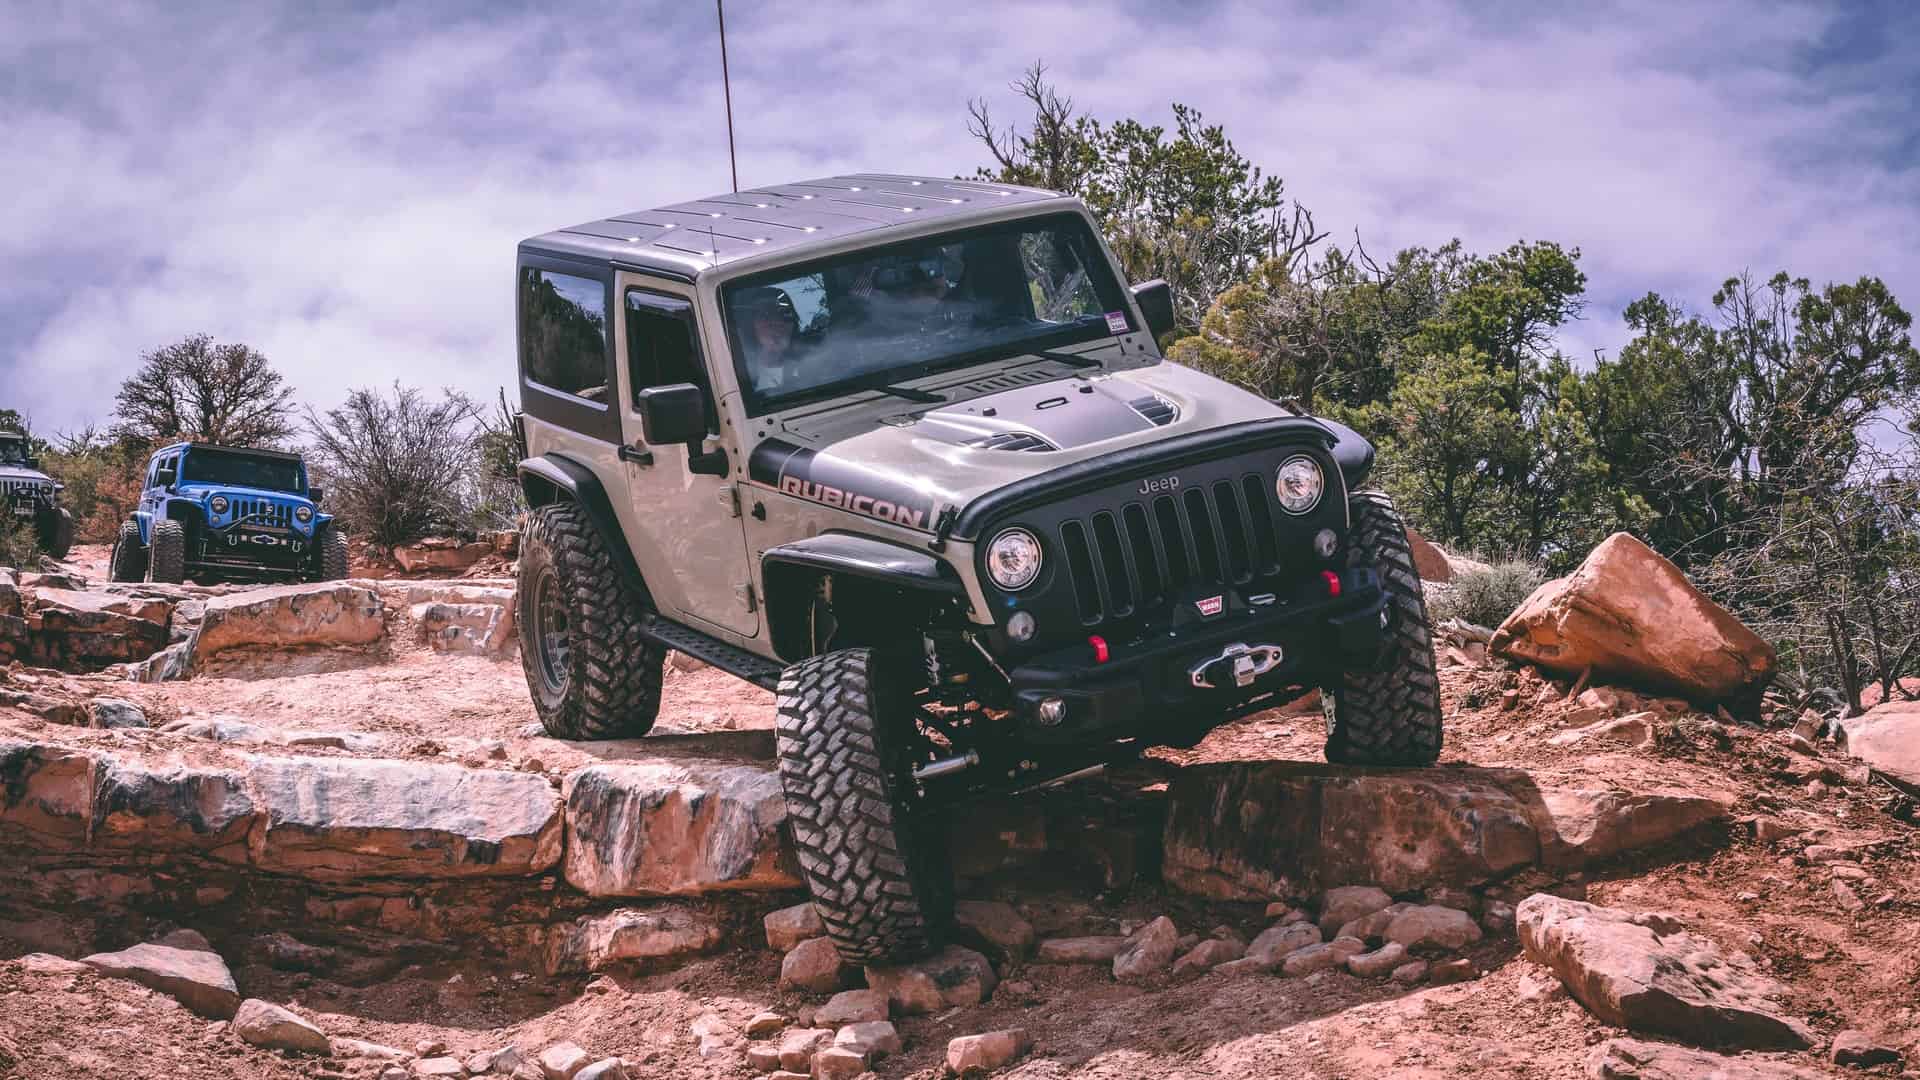 Best things to do in Moab Utah - Rosanne McHenry - Jeep tour by Cody Lannom on Unsplash